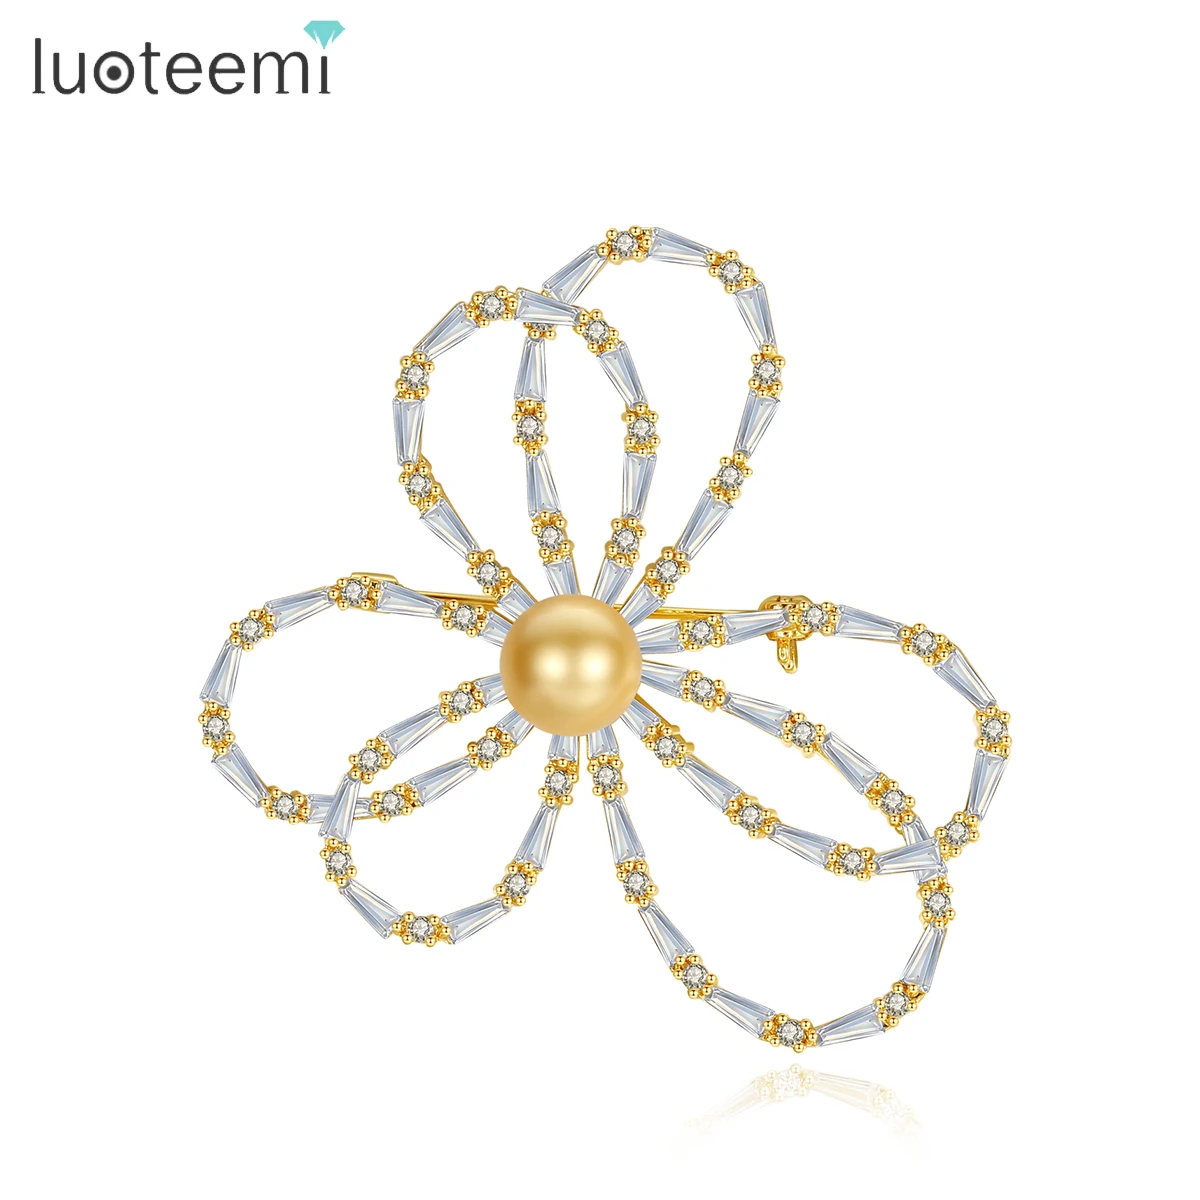 

LUOTEEMI Yellow Gray Pearls Brooch for Women Cubic Zirconia Cute Flowers Shaped Fashion Jewelry Wedding Prom Anniversary Gift